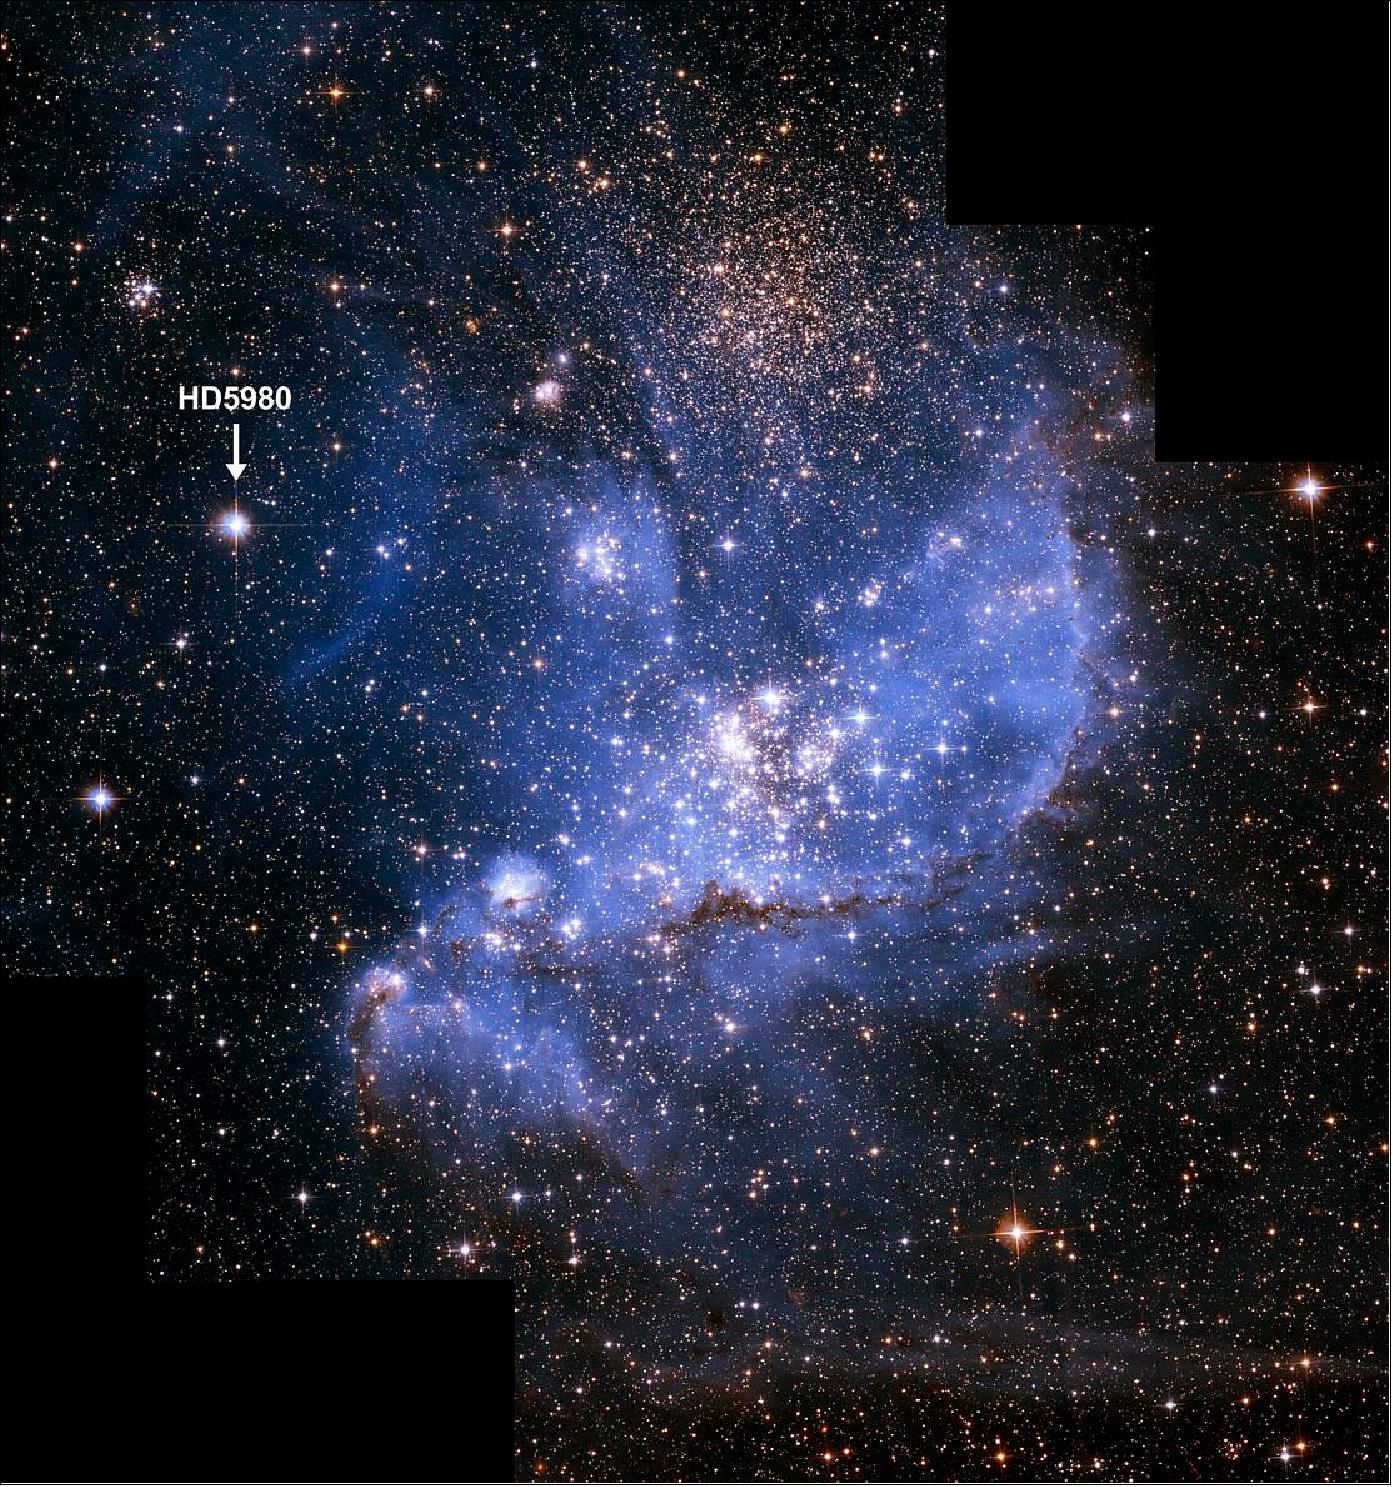 Figure 89: A Hubble Space Telescope view of the cluster NGC 346 - the arrow indicates the position of HD 5980 [image credit: NASA, ESA, A. Nota (STScI/ESA)] 99)